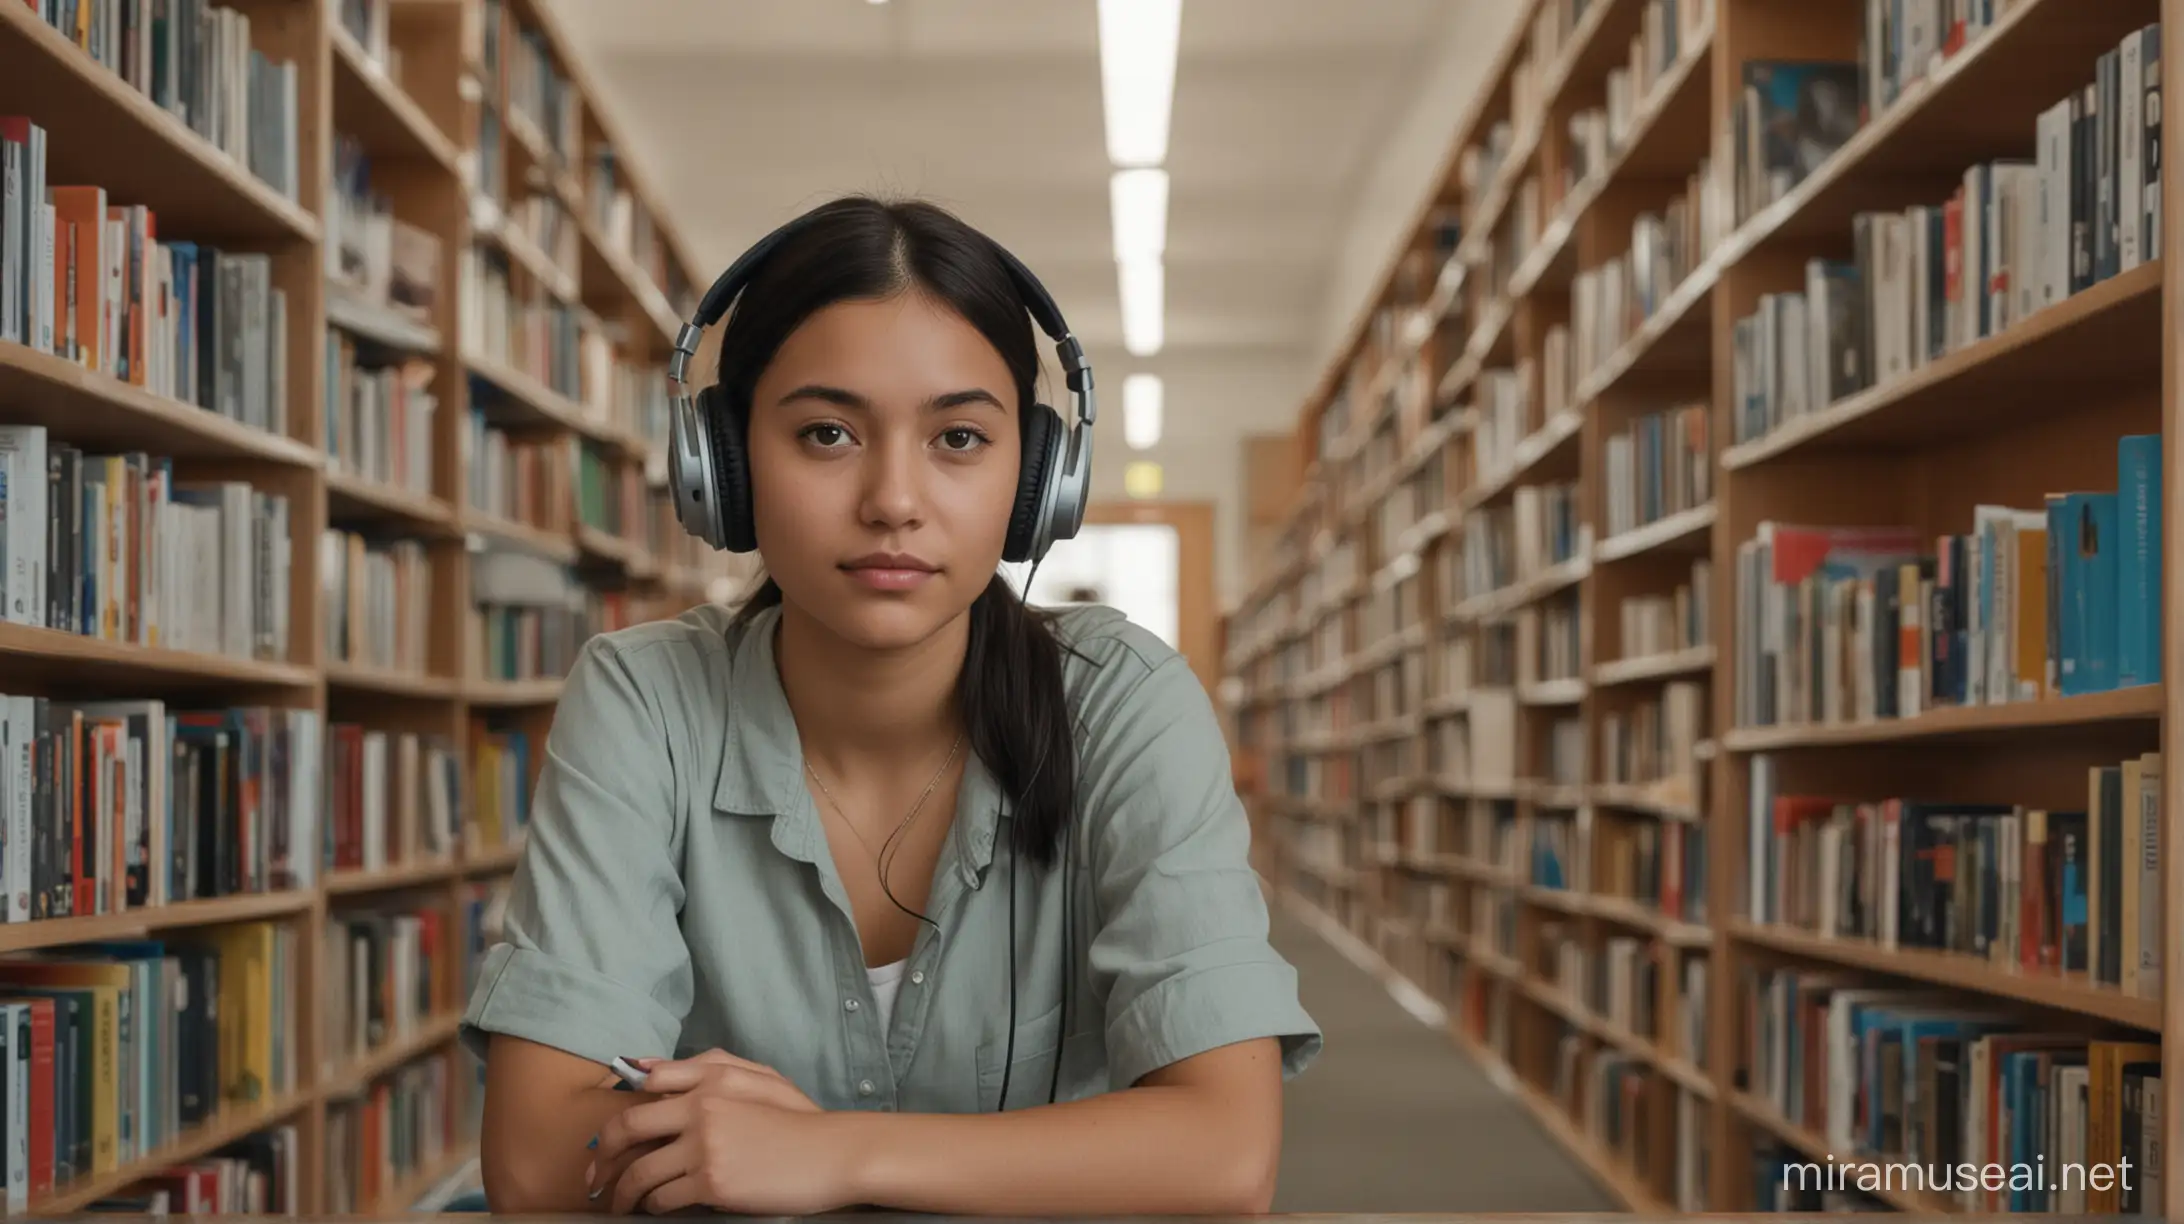 Focused Student Studying in Quiet Library with Headphones